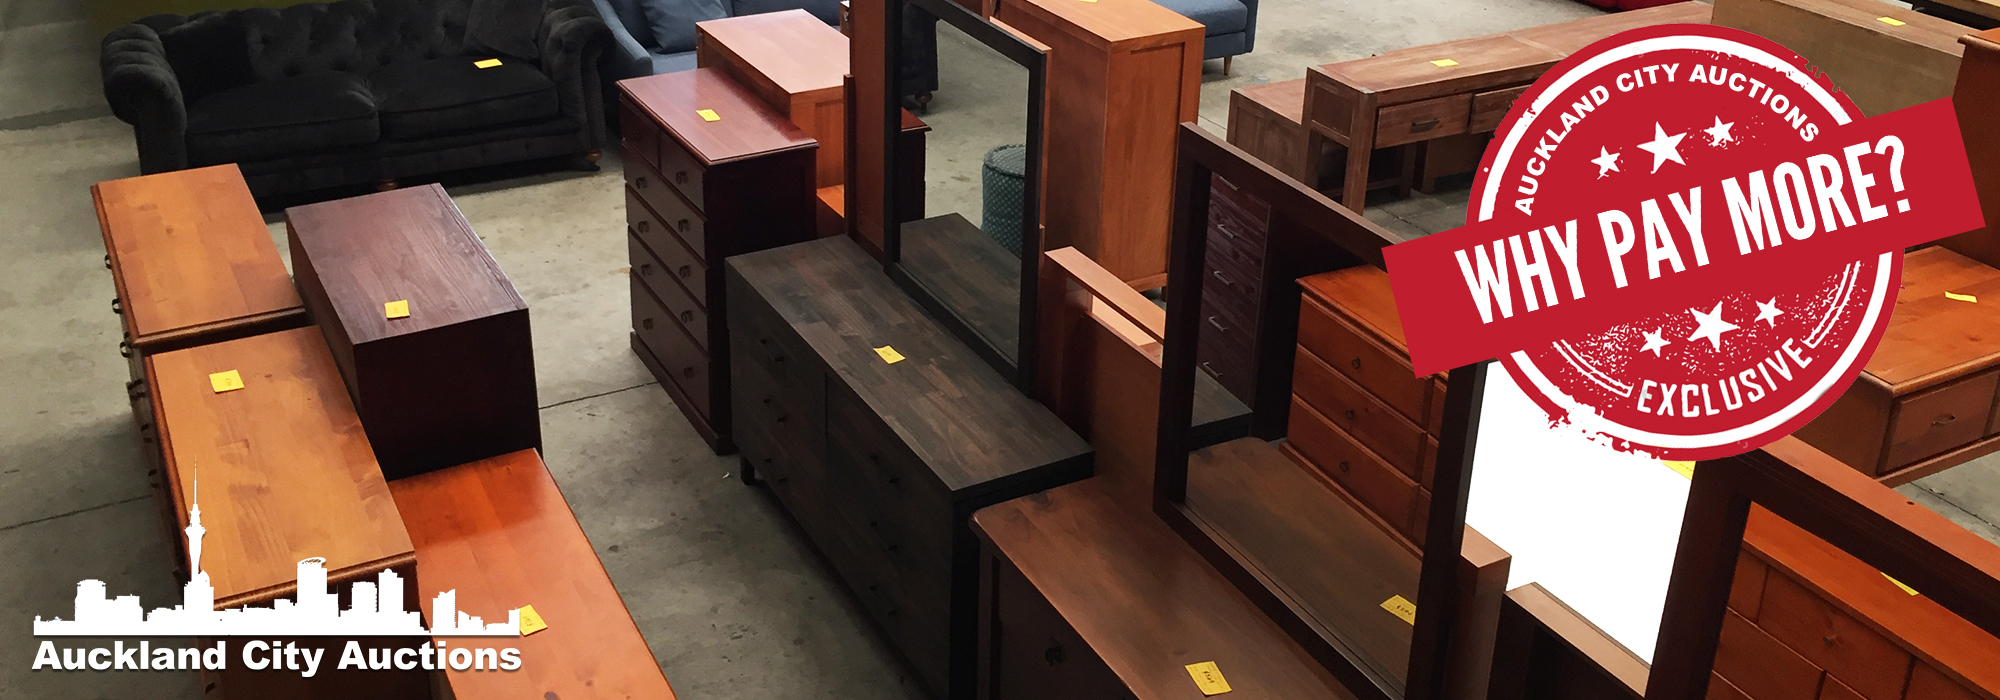 AucklandCityAuctions-drawers